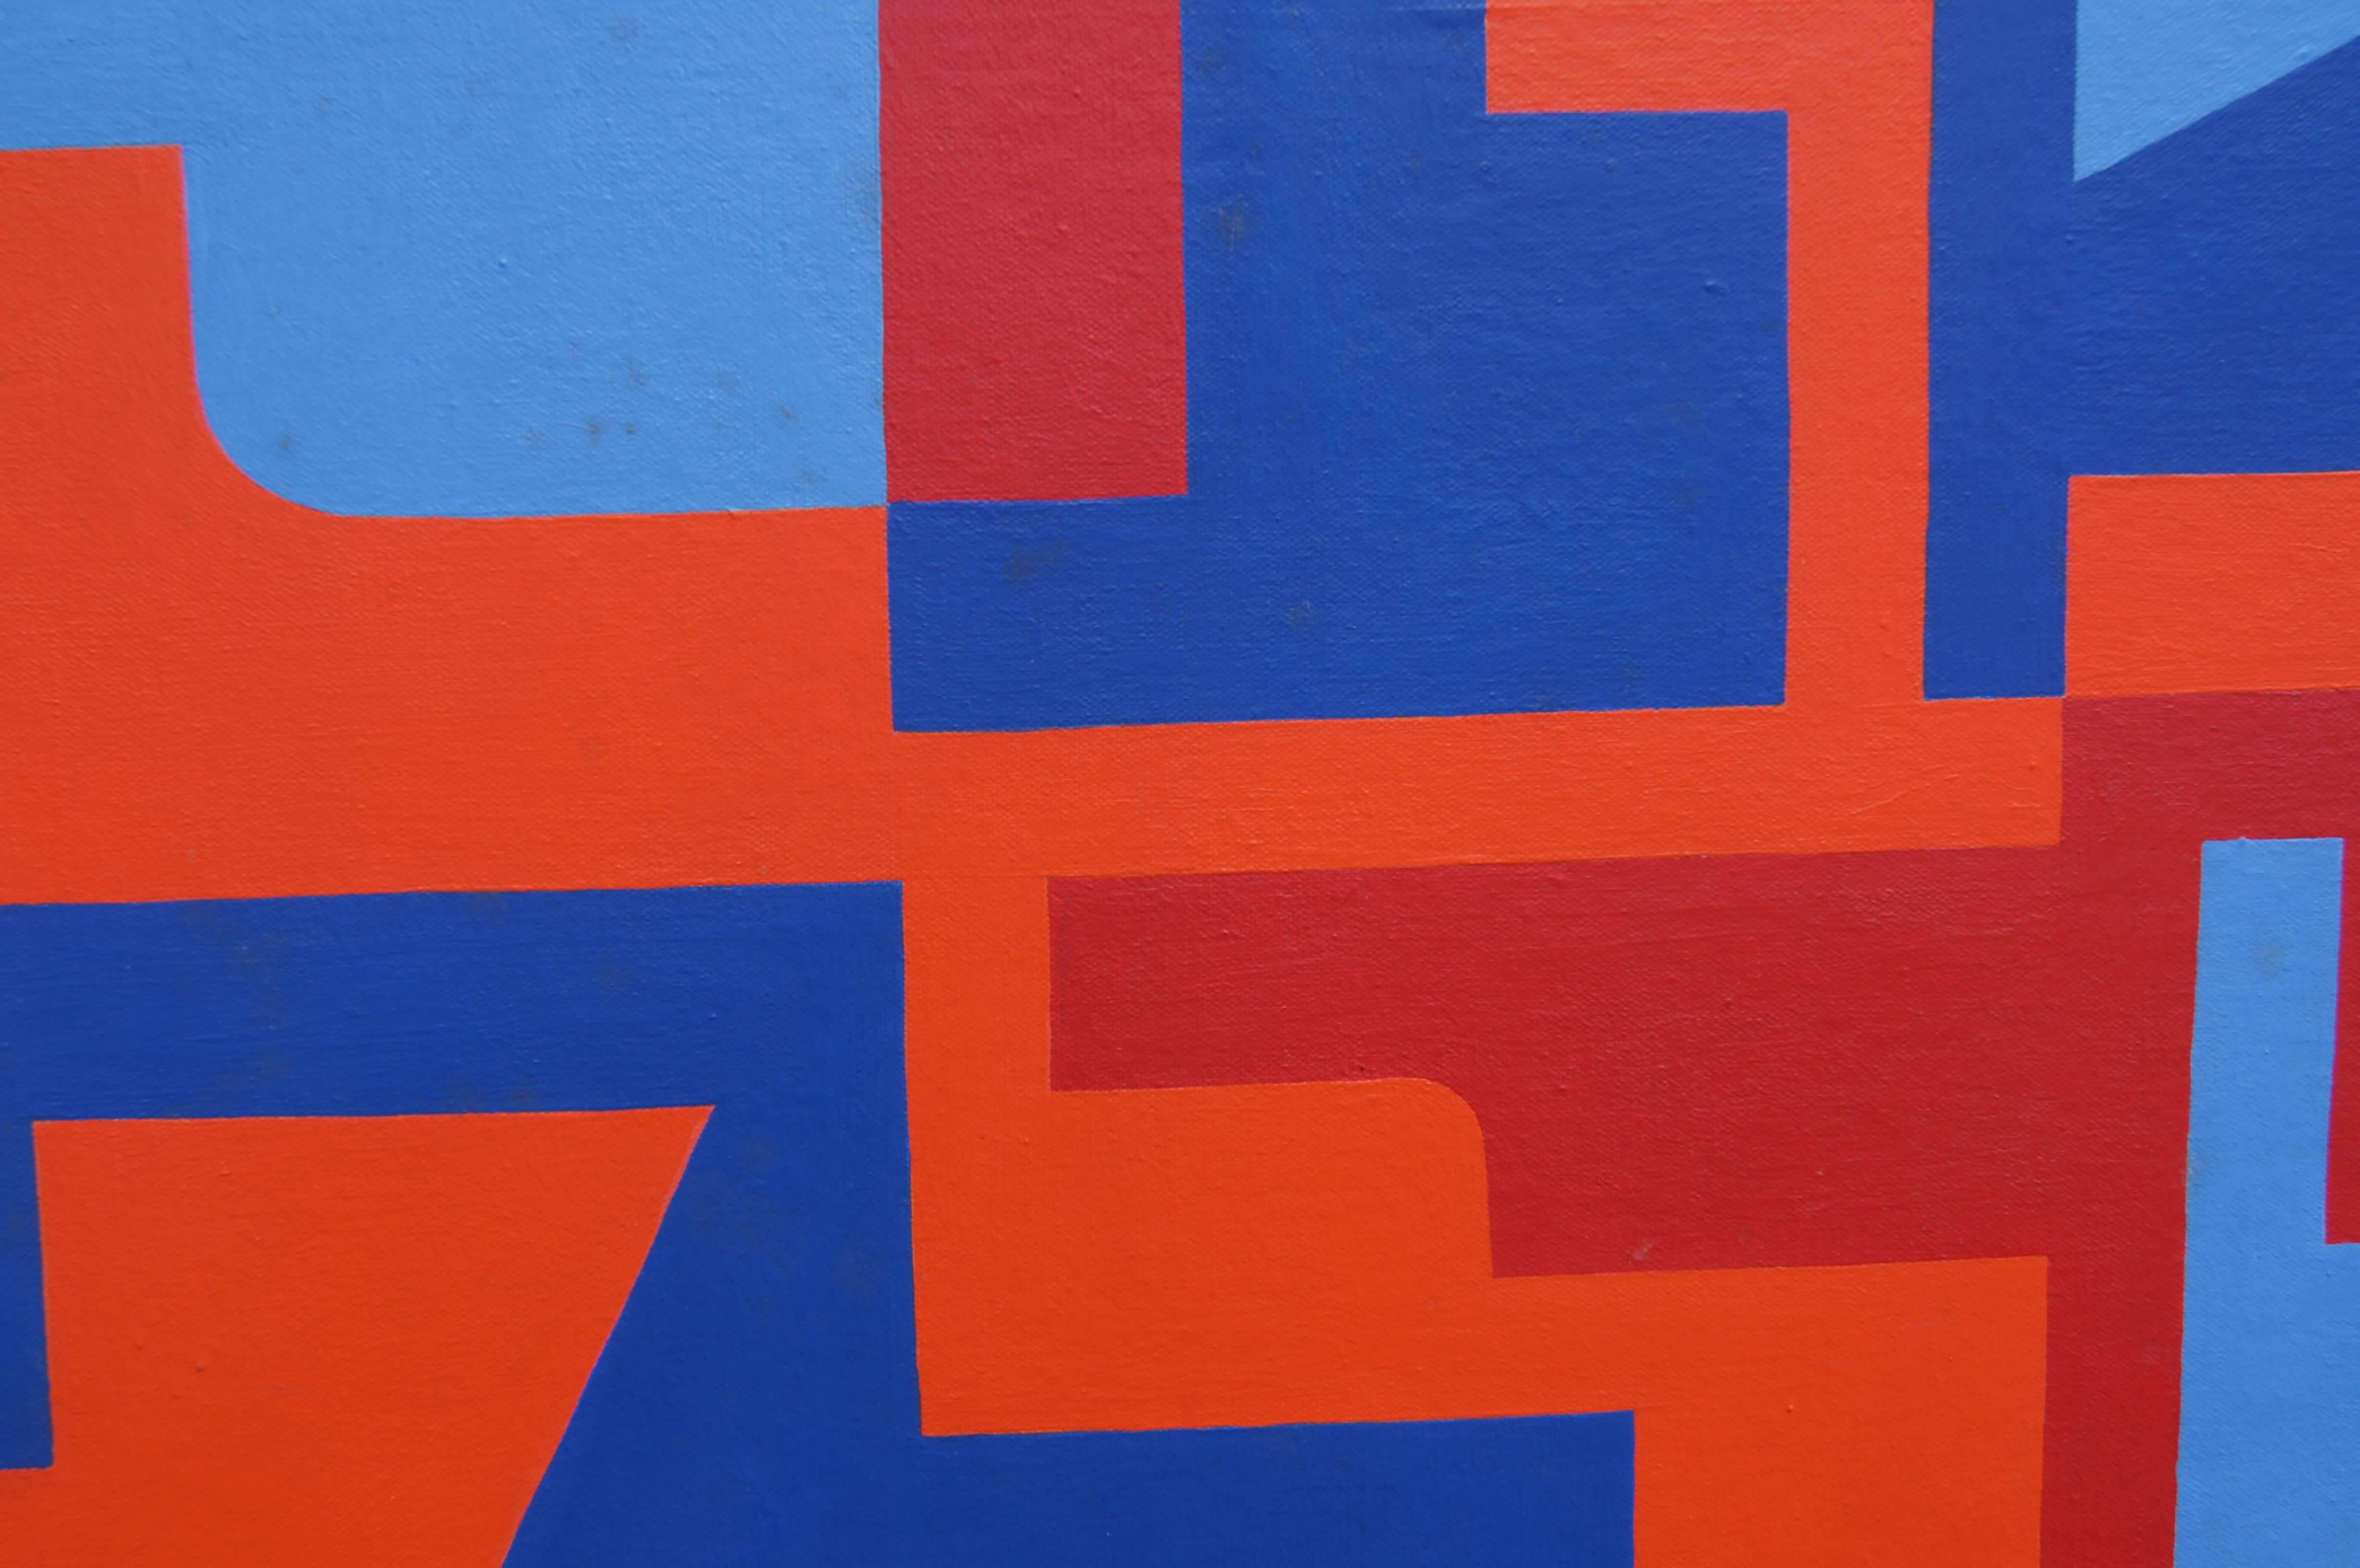 This 1969 abstract painting, juxtaposing reds, oranges and blues, is the work of Norman Ives (1923-1978). An artist and graphic designer based in New Haven, he was also a publisher of fine portfolios of many of the century's top modernist artists.